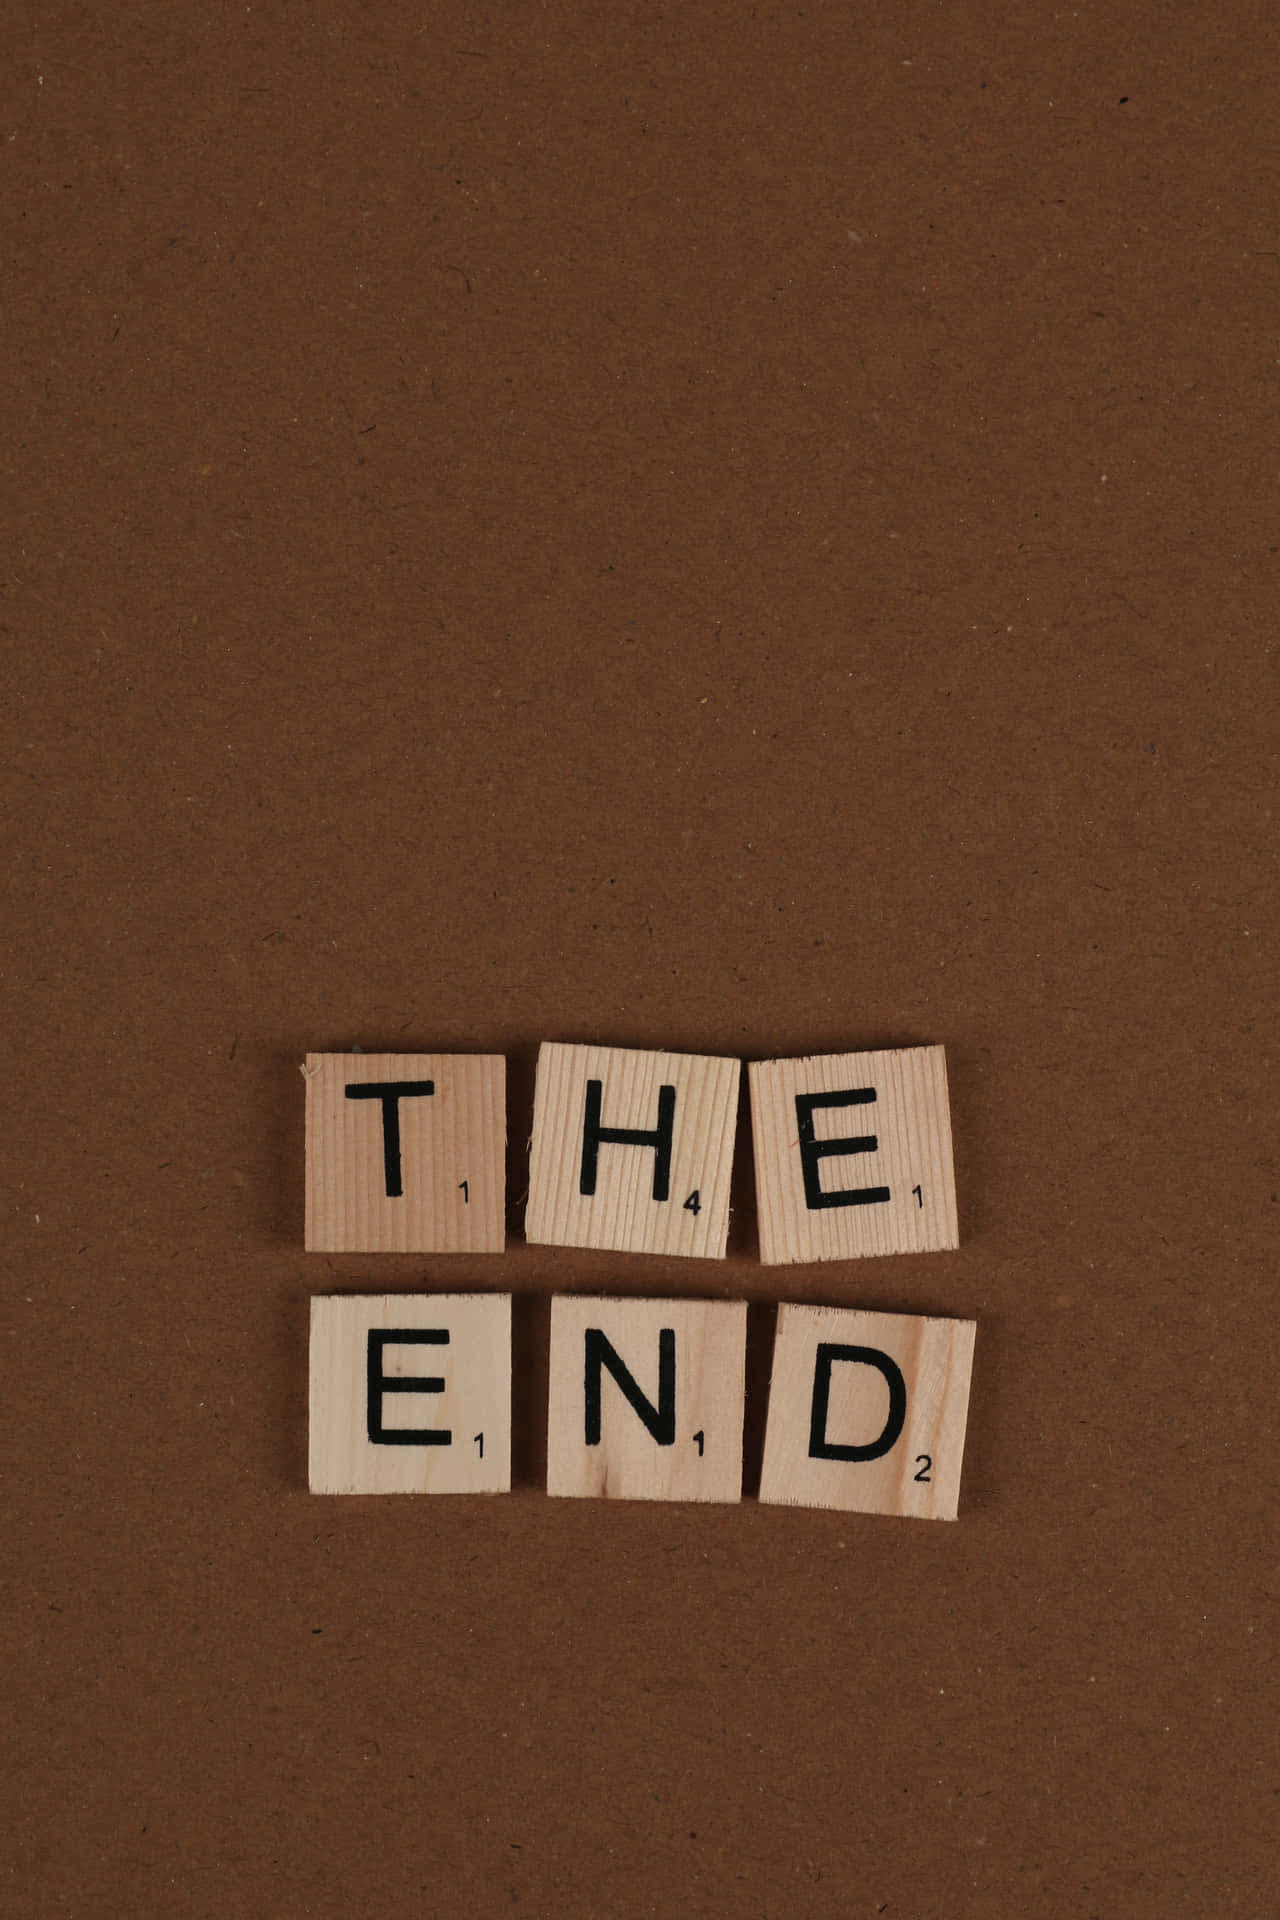 Time to face The End. Wallpaper